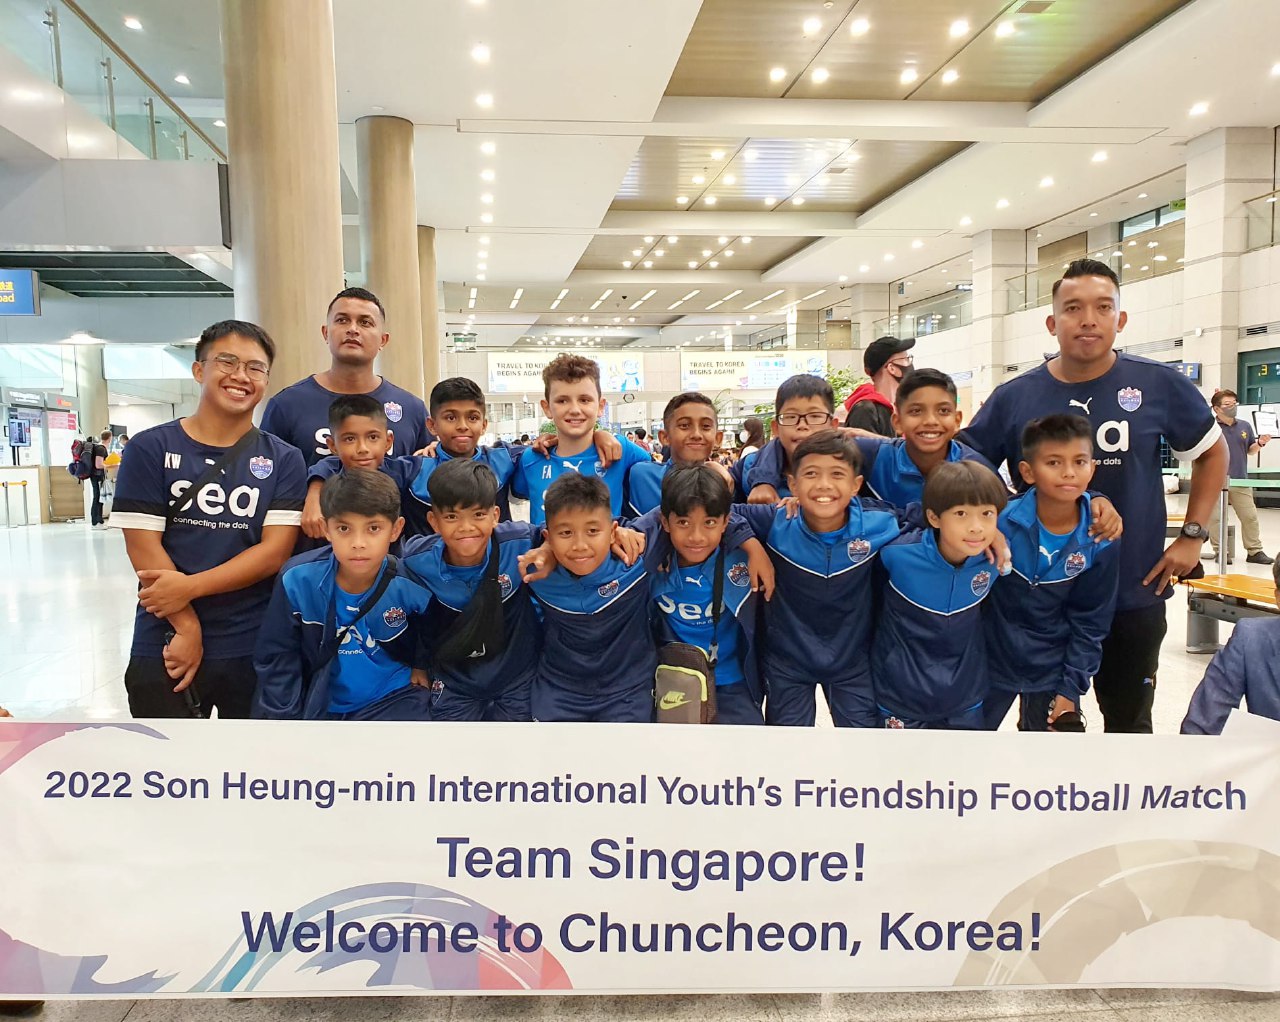 ‘Best experience in my life so far’ as Lion City Sailors youth players see benefits after attending Son Heung-min Football Tournament